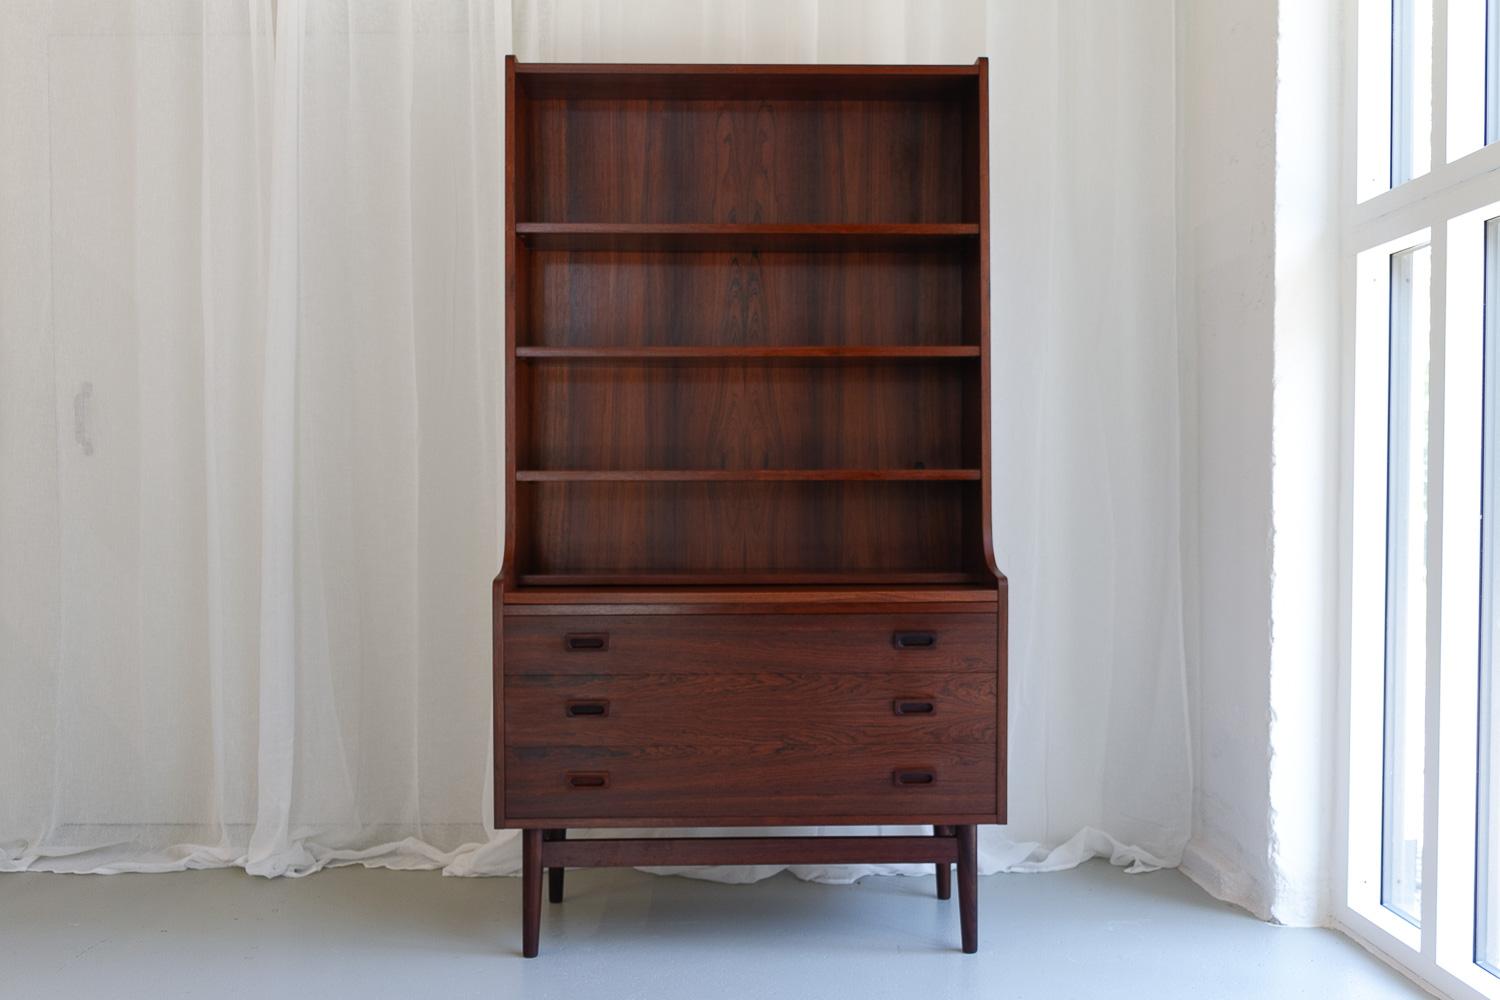 Mid-Century Modern Danish rosewood bookcase, 1960s.

This Classic Scandinavian bookcase was designed by Danish master carpenter Johannes Sorth for Nexø Møbelfabrik, Bornholm, Denmark in 1956. The idea was to combine a cabinet and a book case, and it